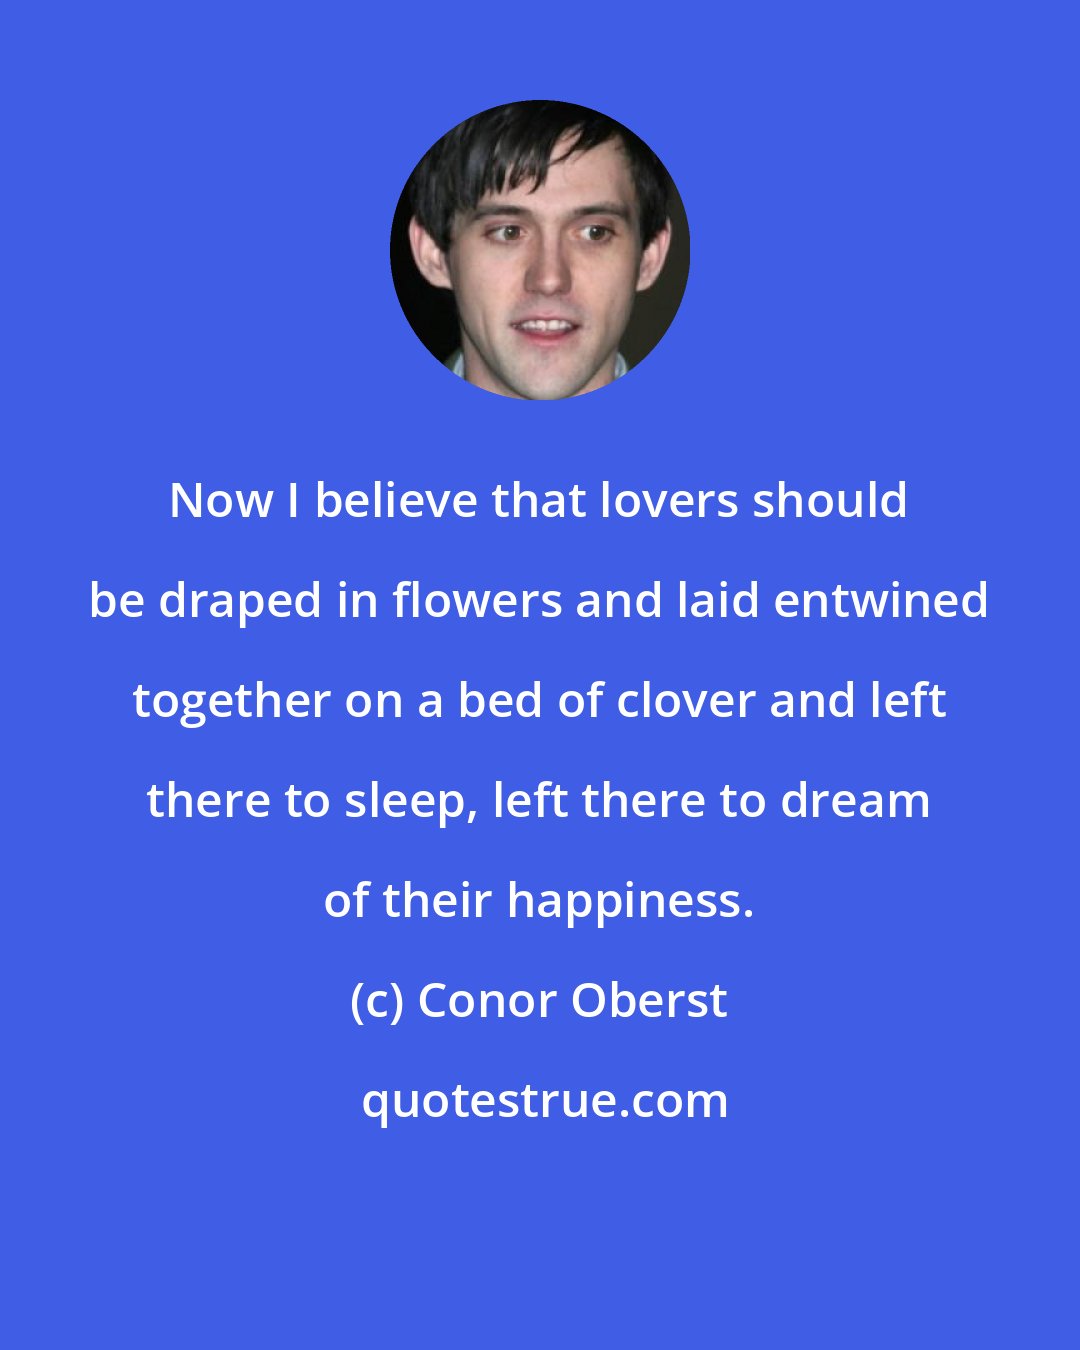 Conor Oberst: Now I believe that lovers should be draped in flowers and laid entwined together on a bed of clover and left there to sleep, left there to dream of their happiness.